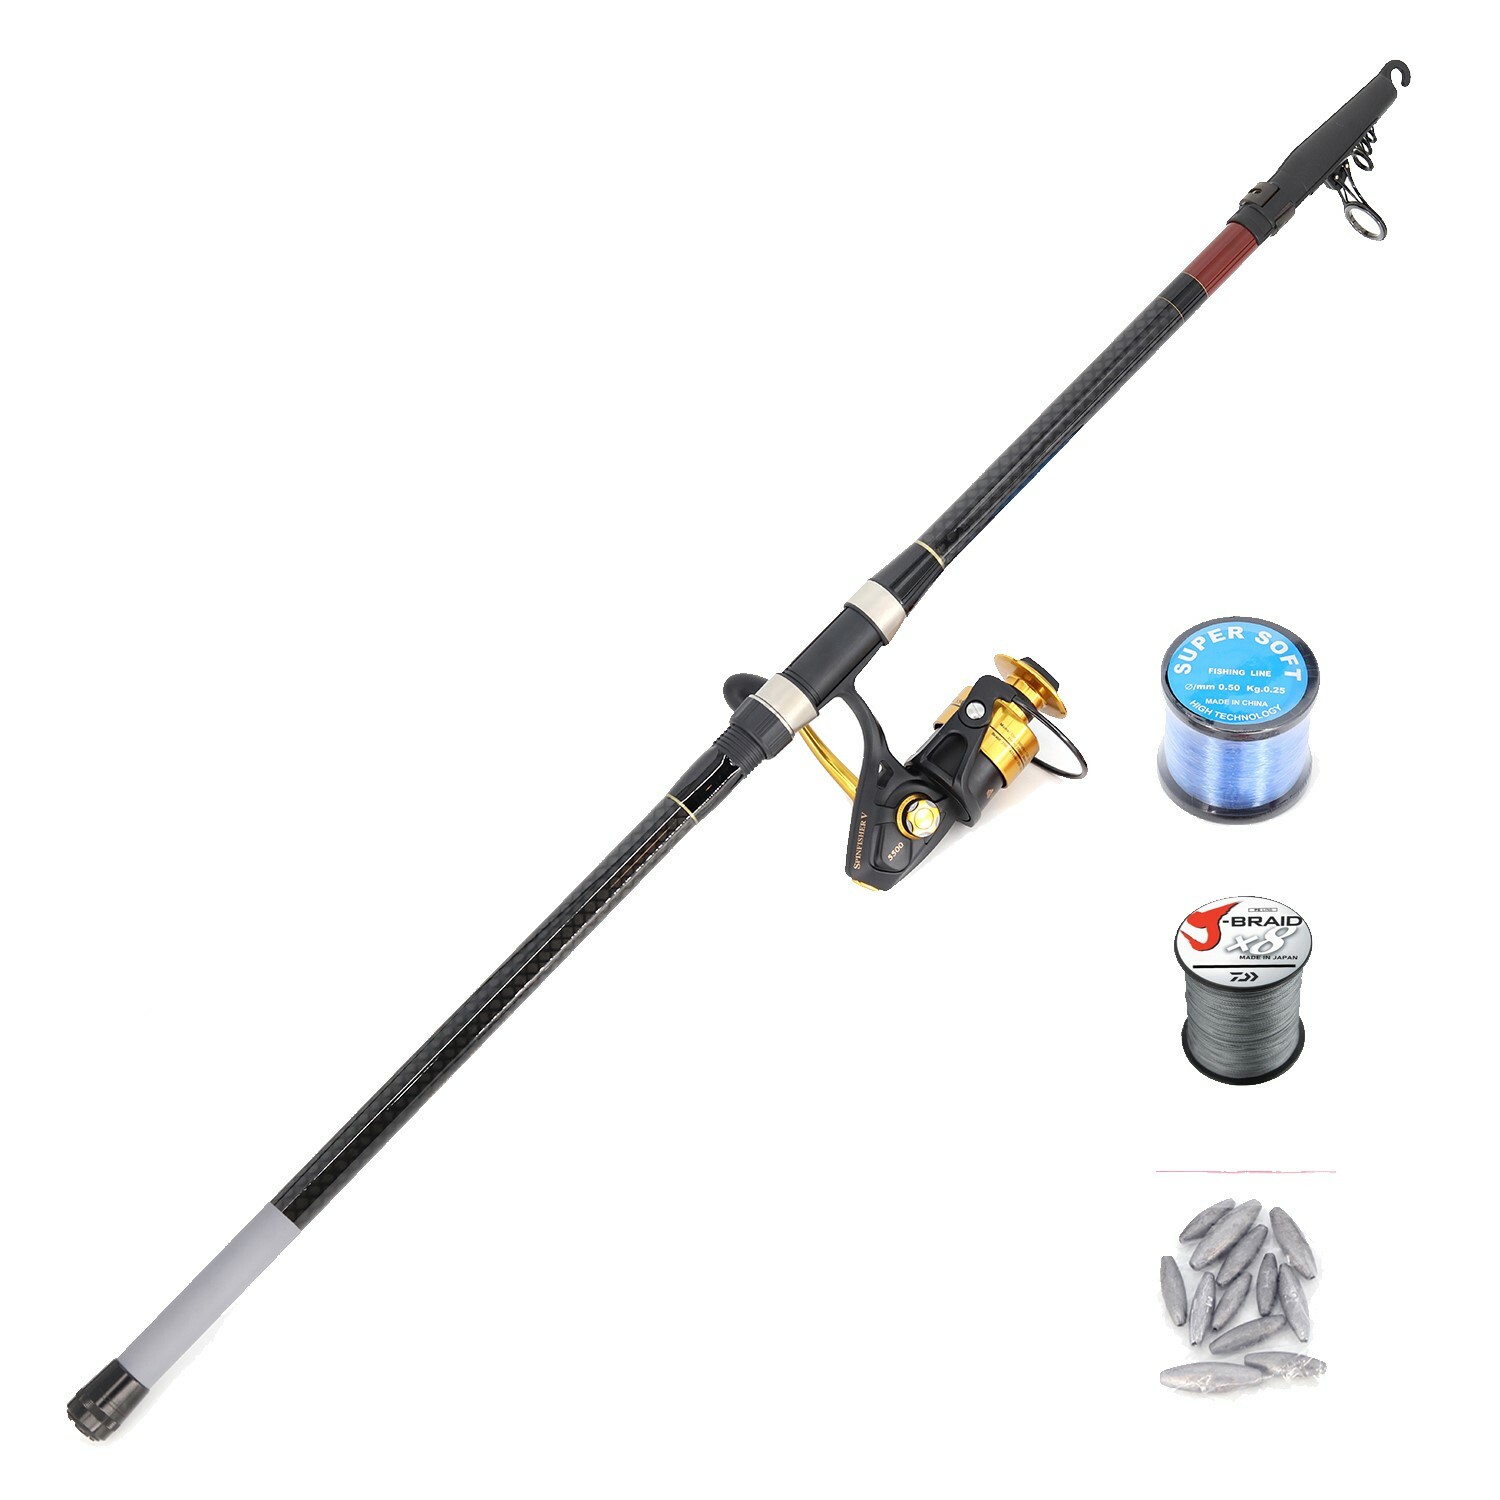 Shore Fishing (Pilot 3.9m and Penn V5500 including braid and mono line with rigs and sinkers) Combo